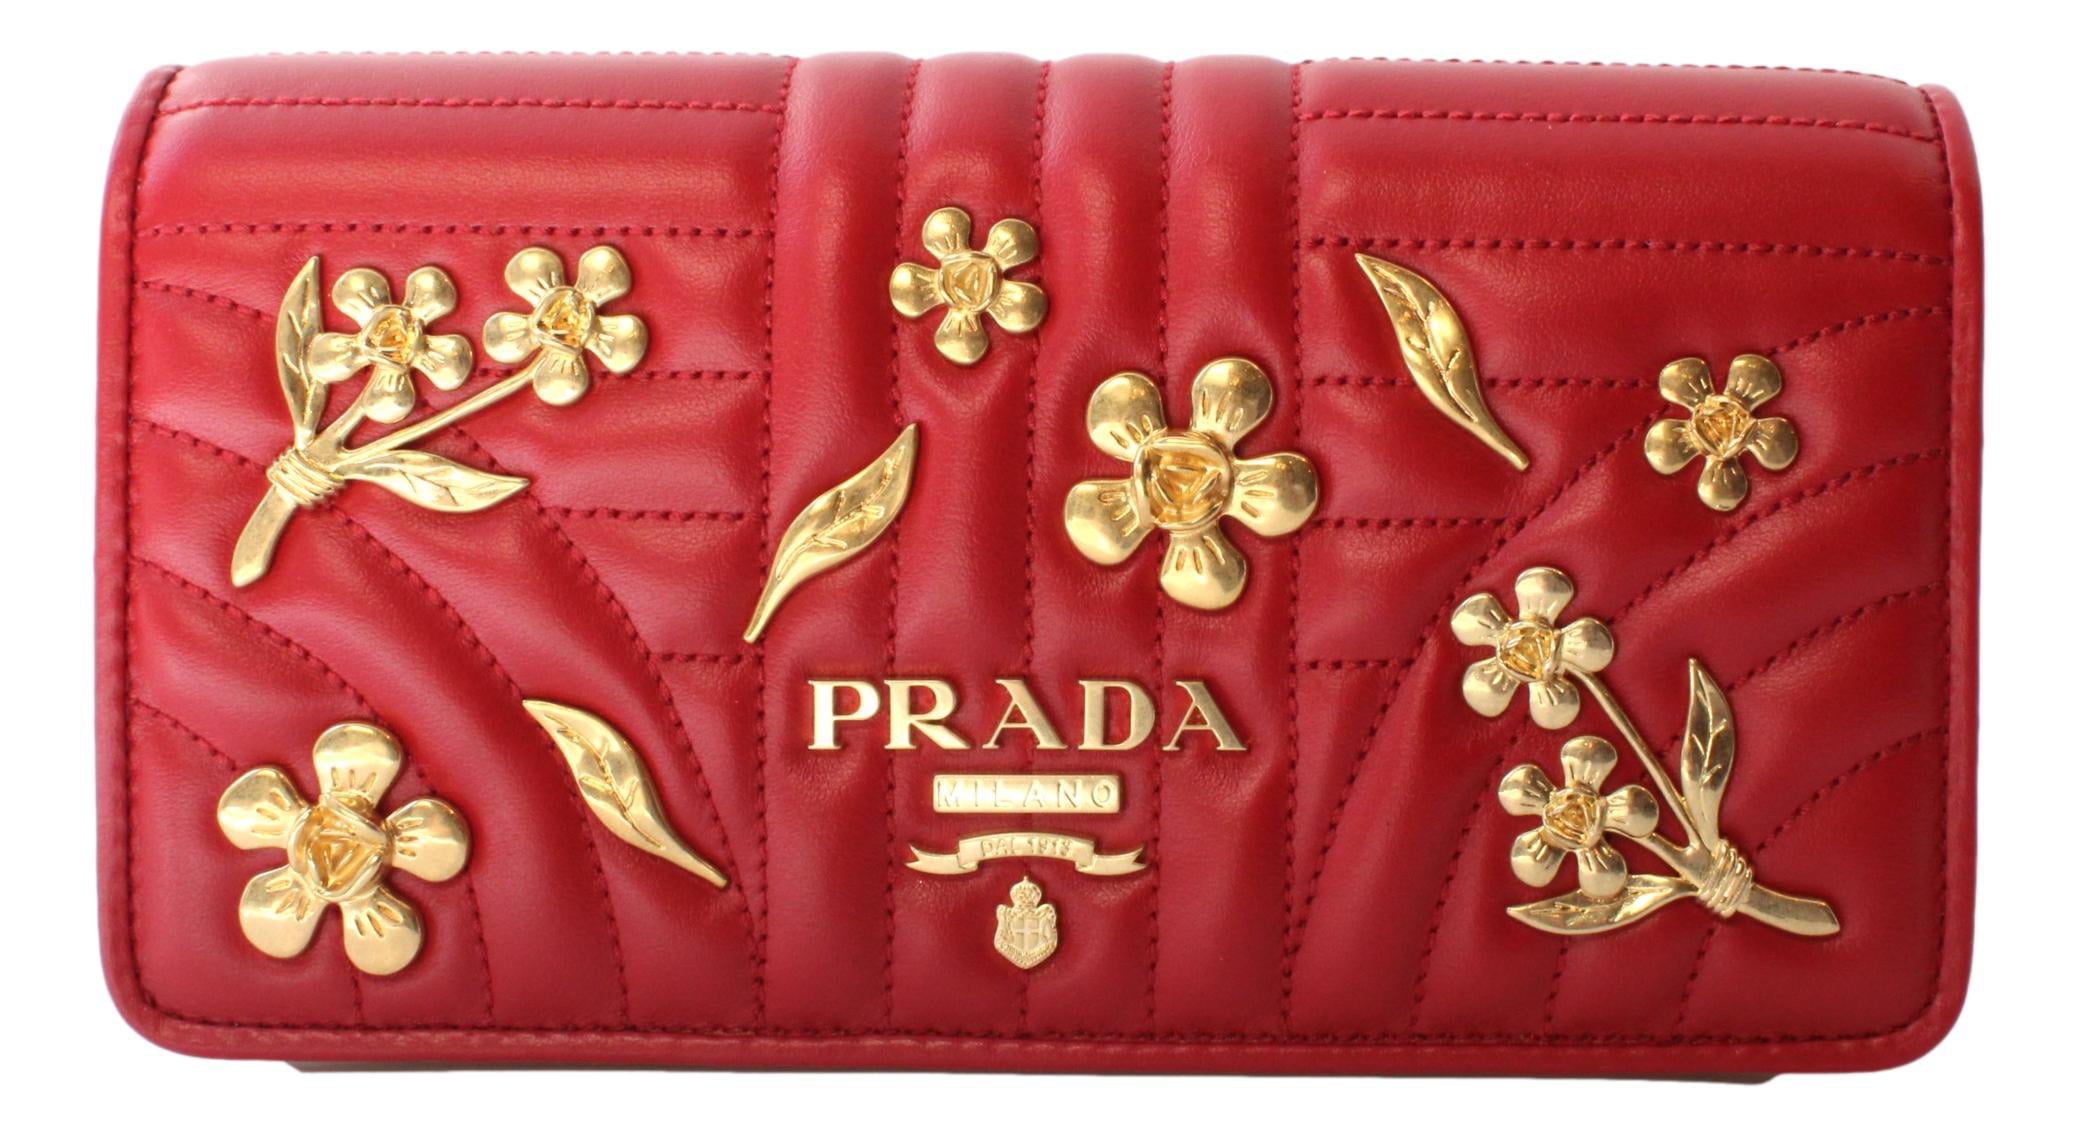 Prada wallet on gold chain. Patterned maxi skirt. Red nails